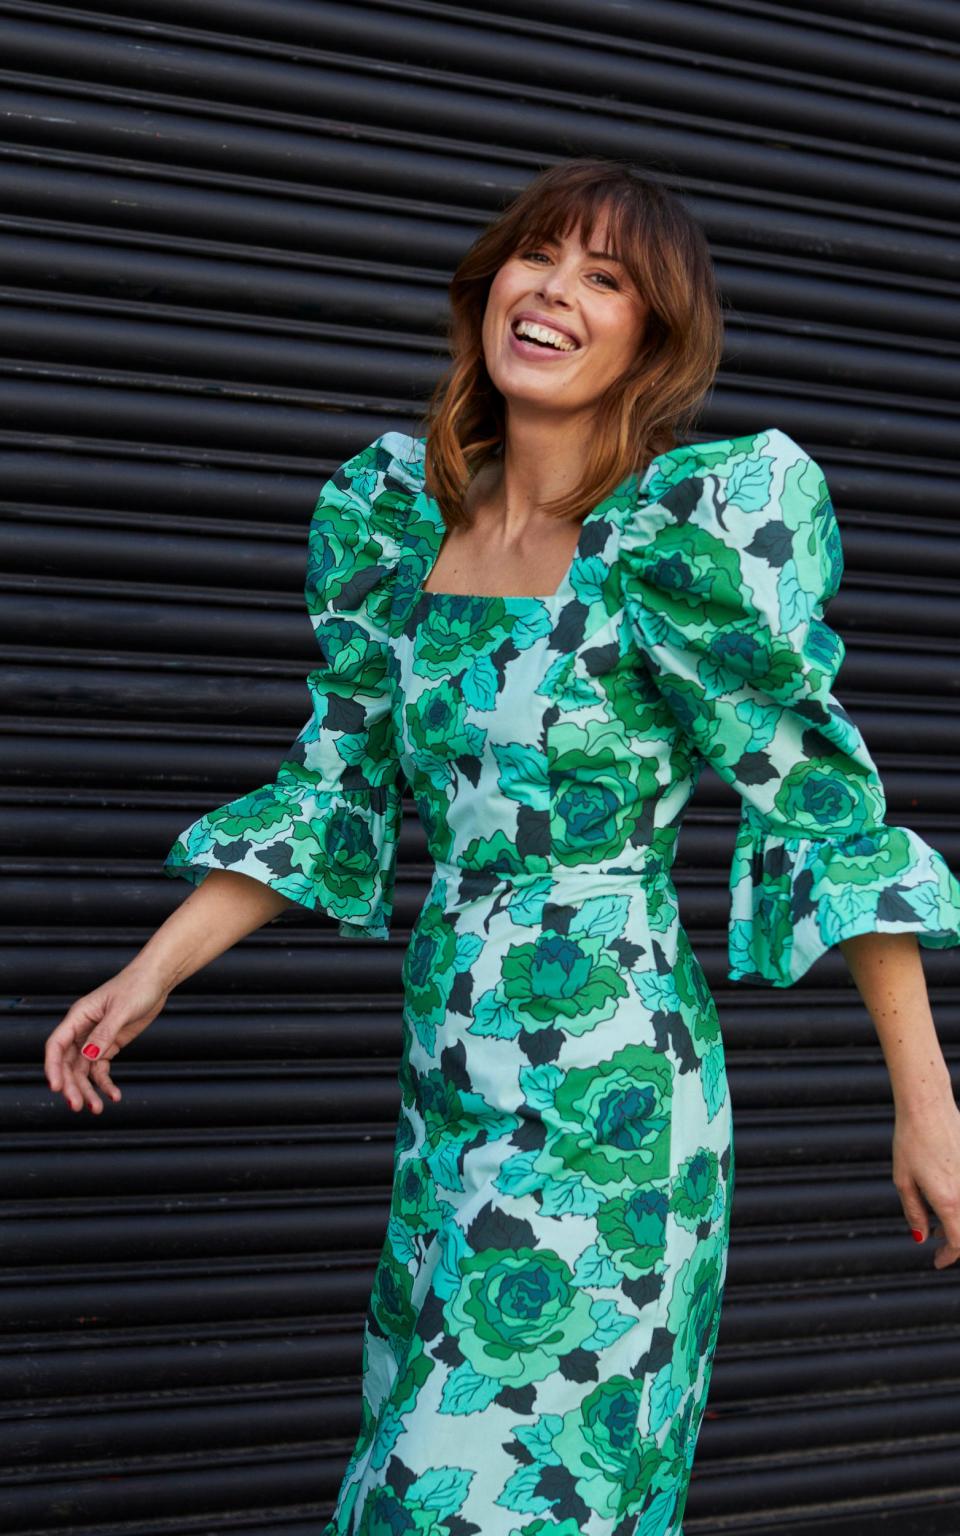 The green floral dress by Mary Benson